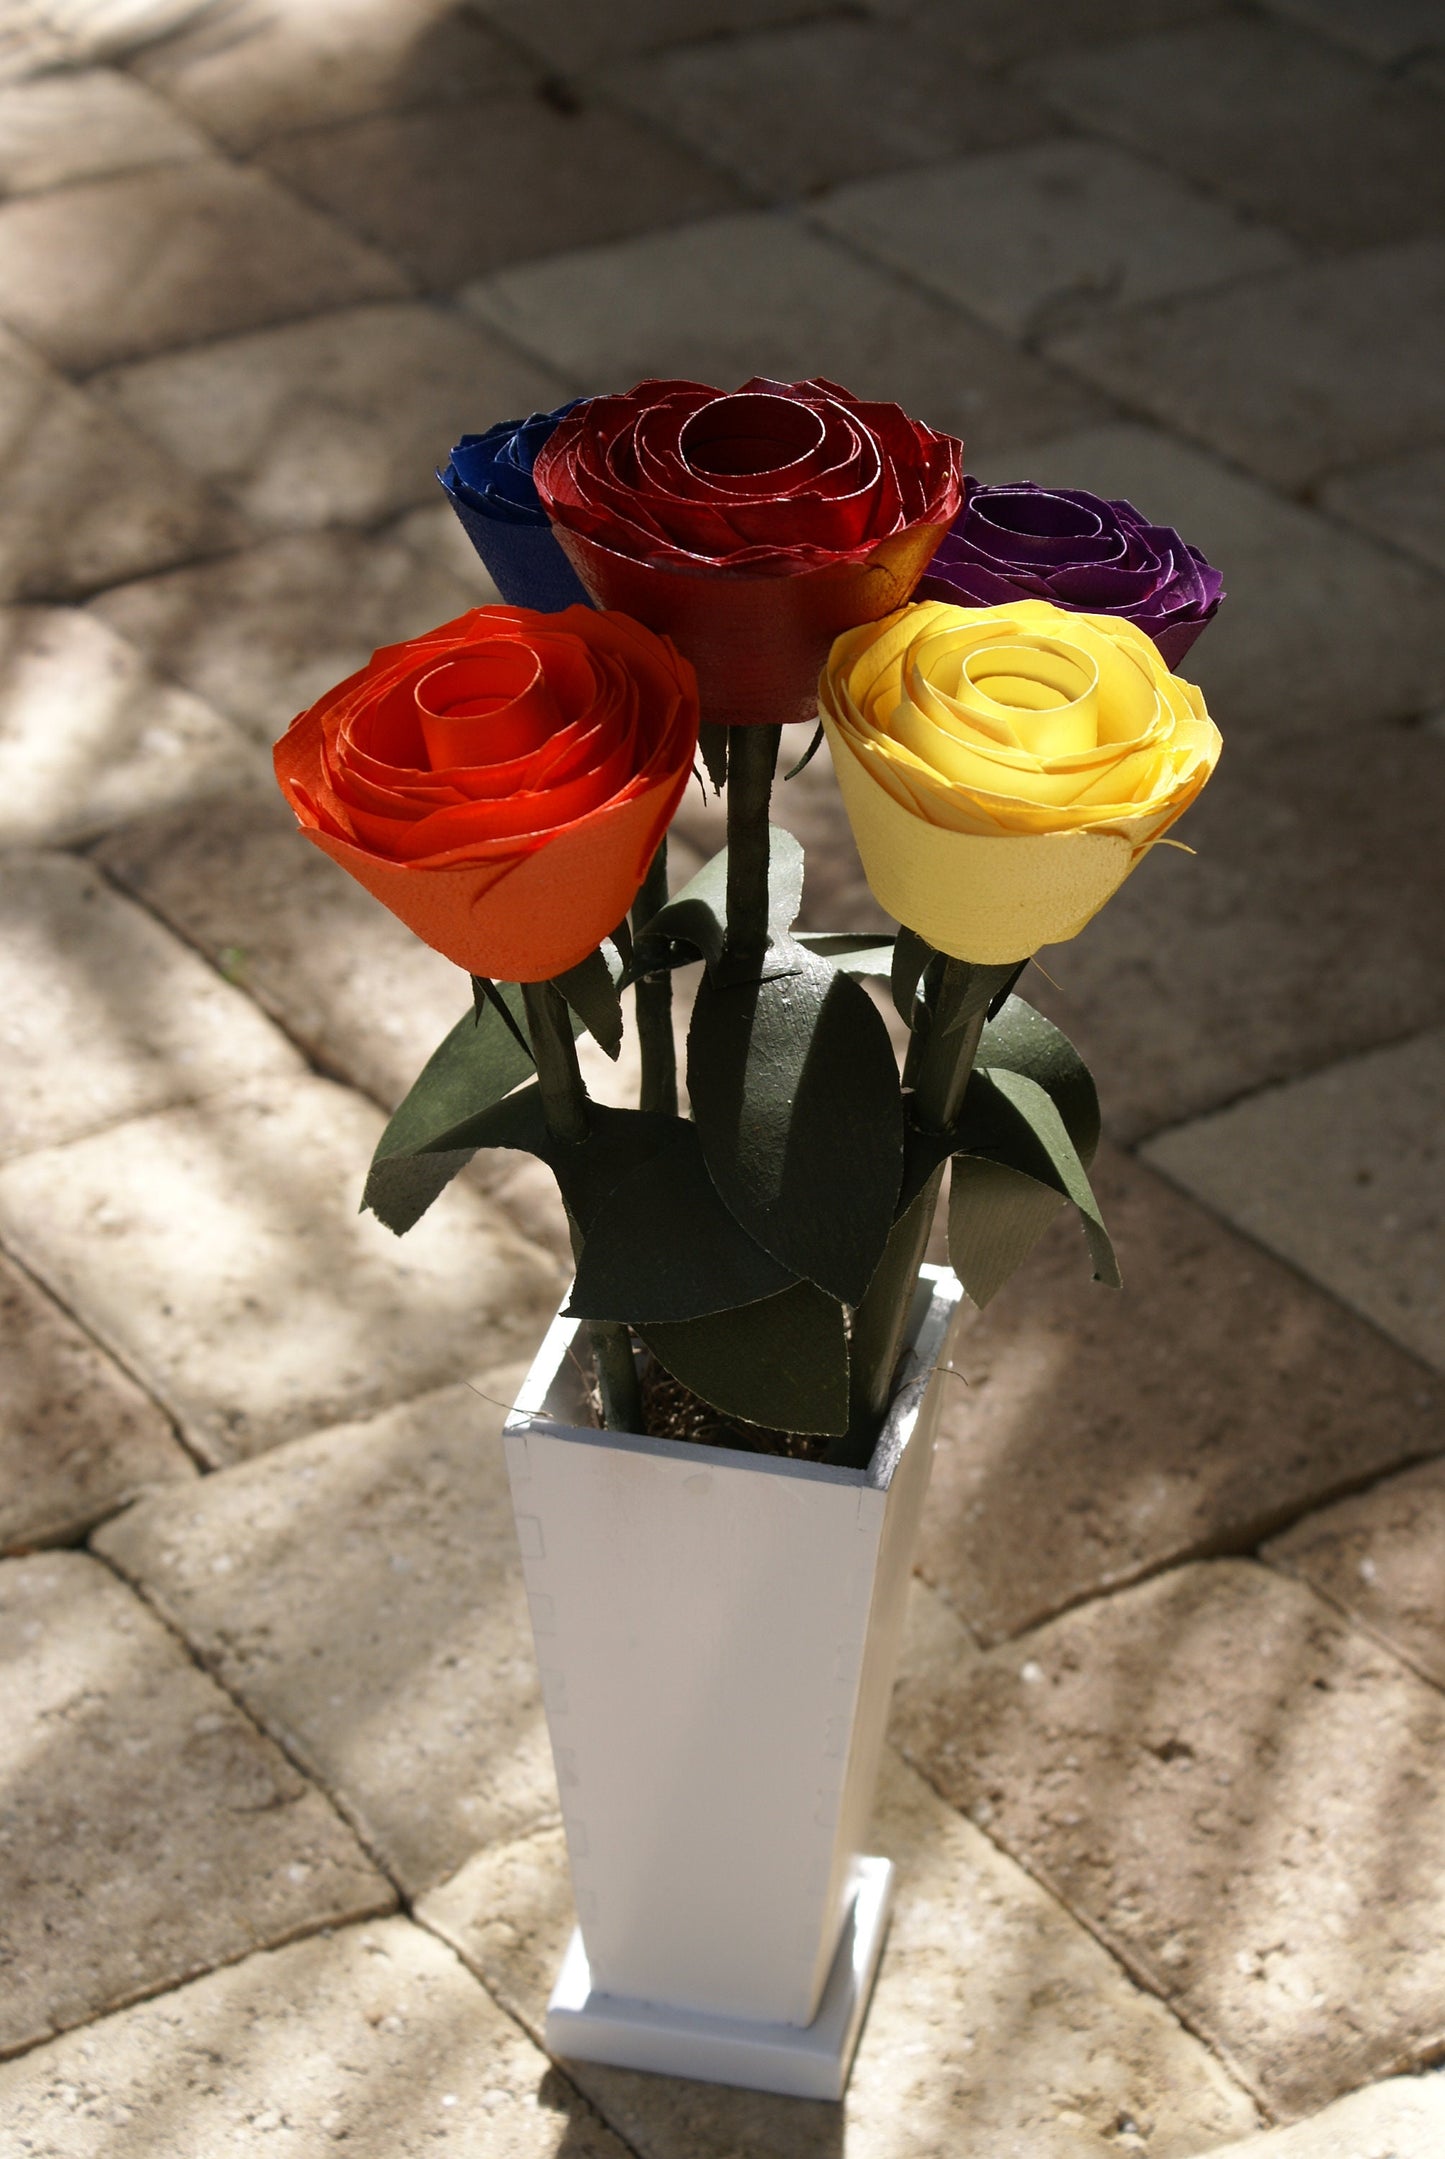 5 Rainbow color wood roses in white vase, Red, orange yellow blue and purple on green stems